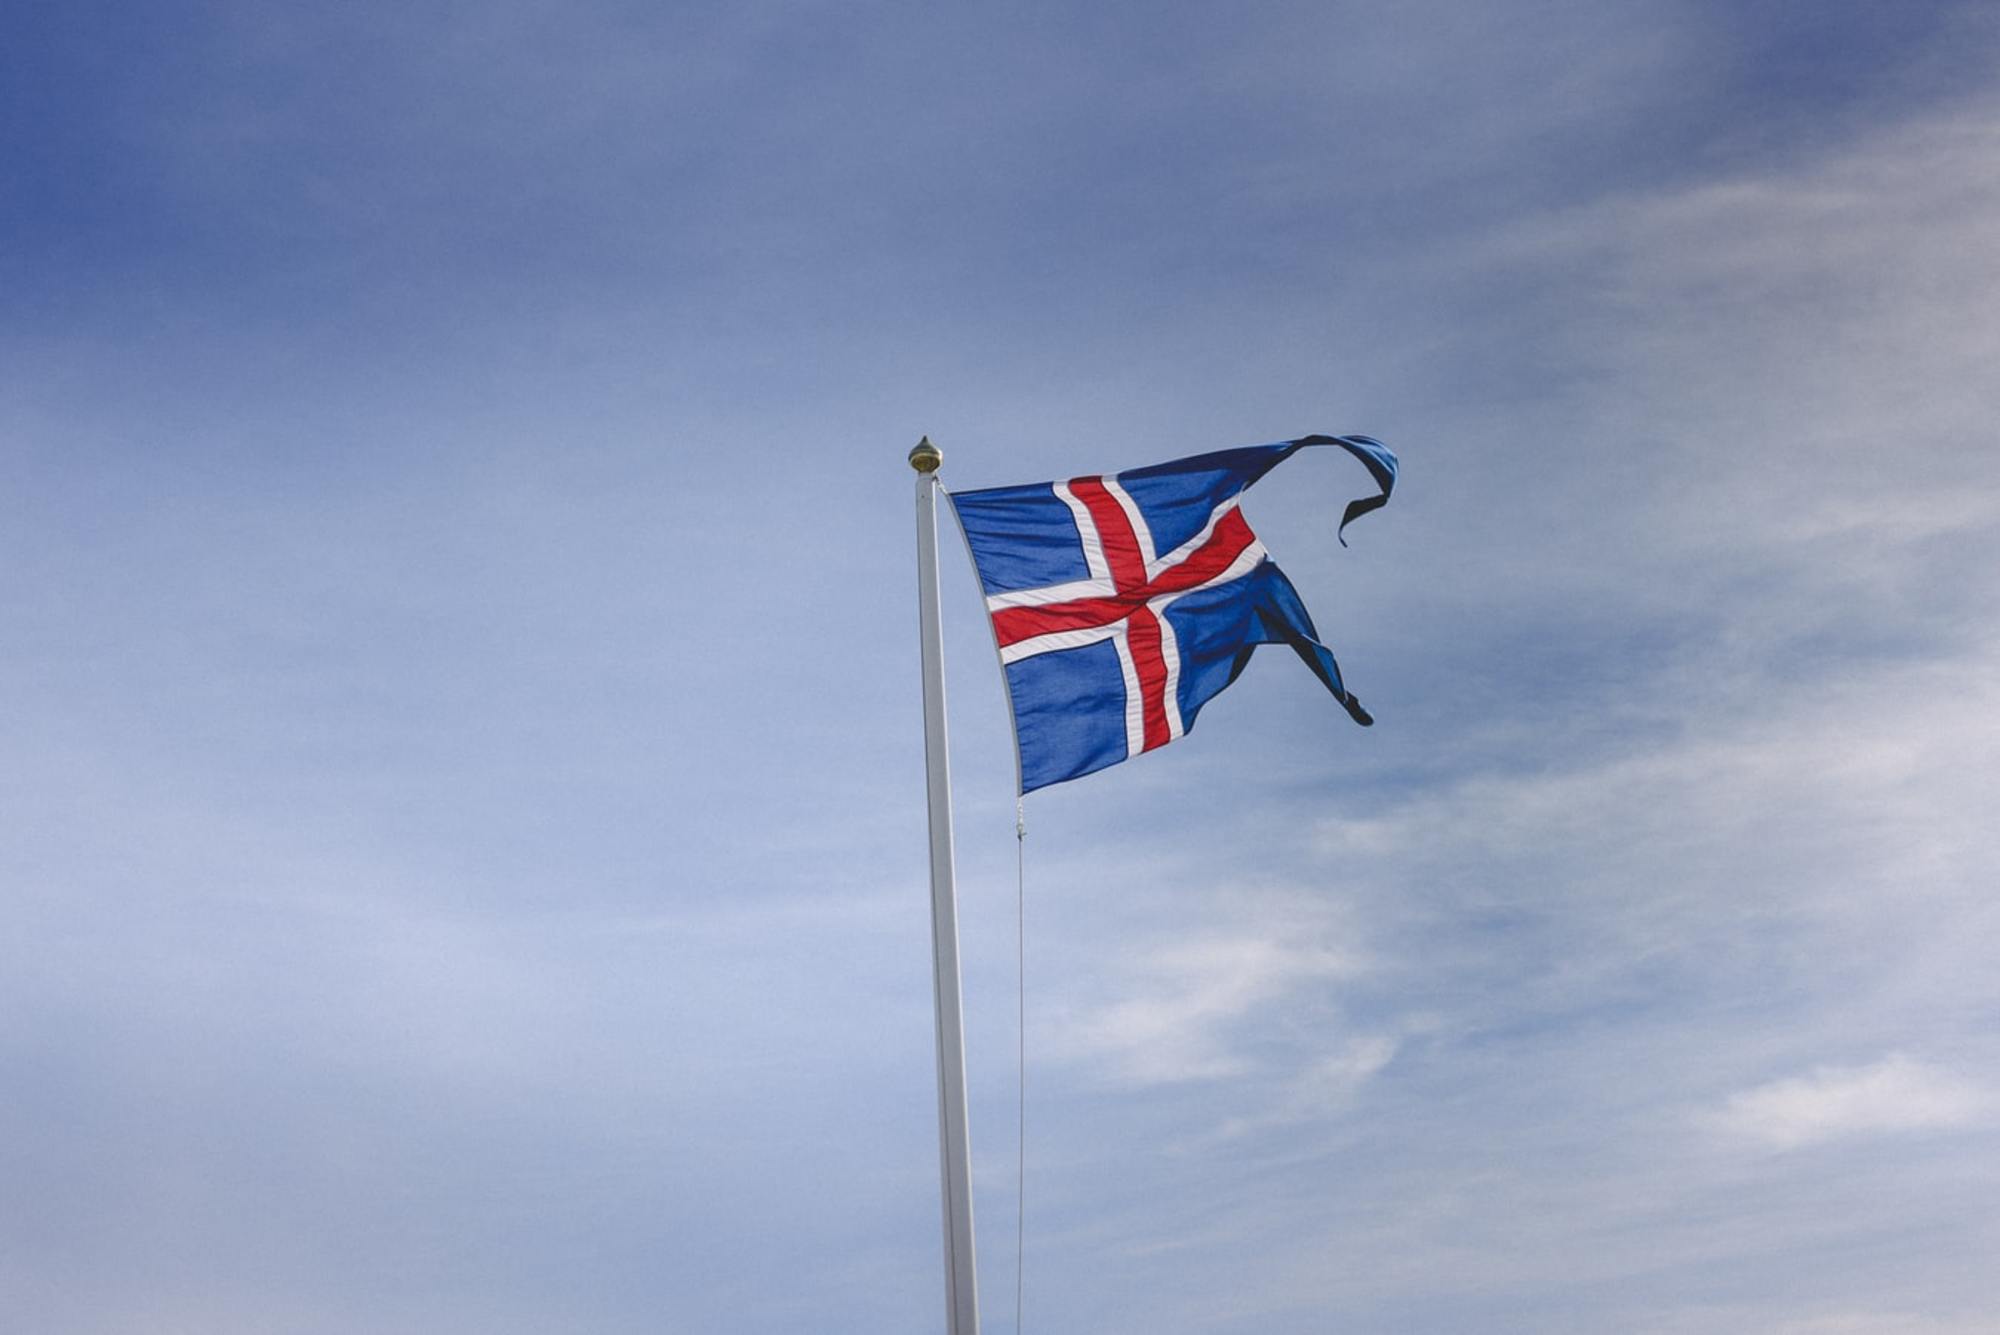 Main reasons why visas in Iceland get denied